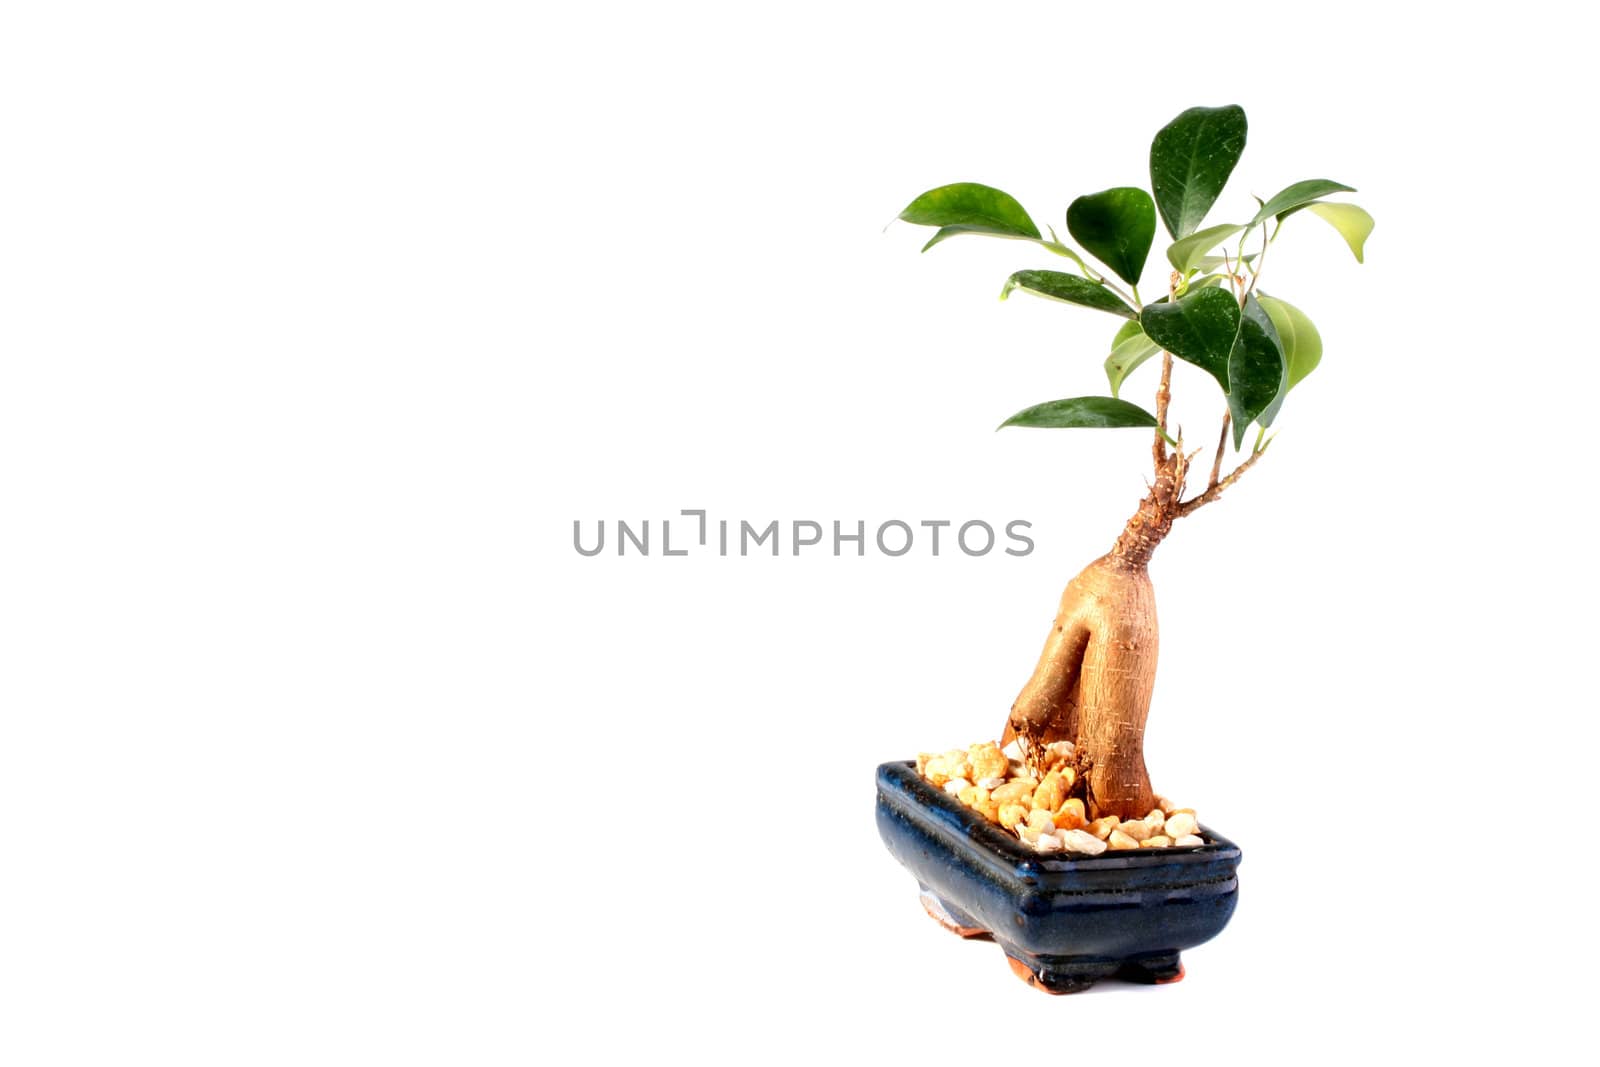 Young tree bonsai in a ceramic vase of dark blue colour on a white background.